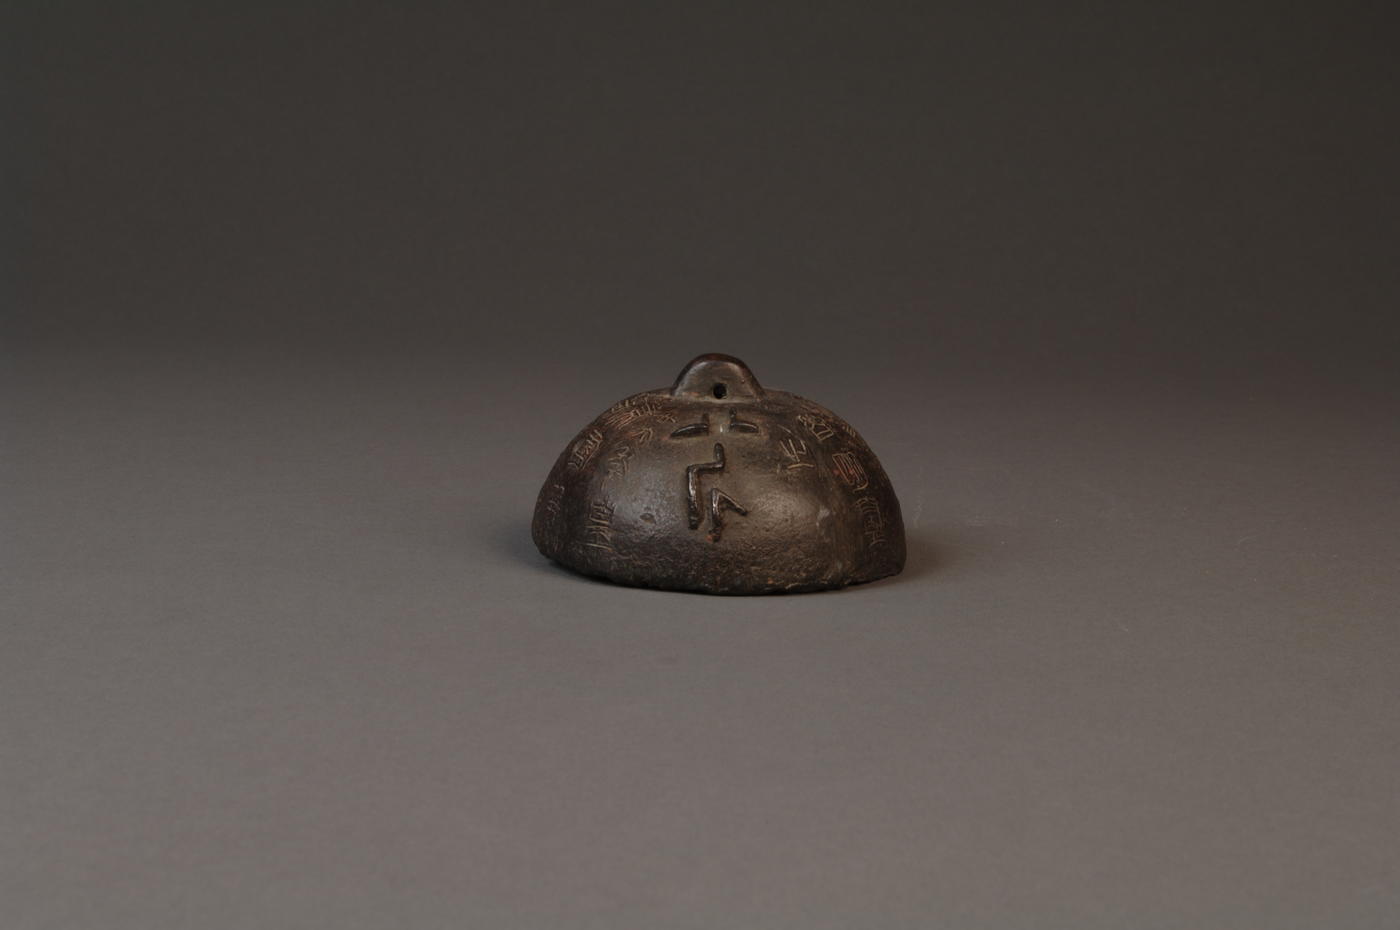 Bronze weight with Chinese writing